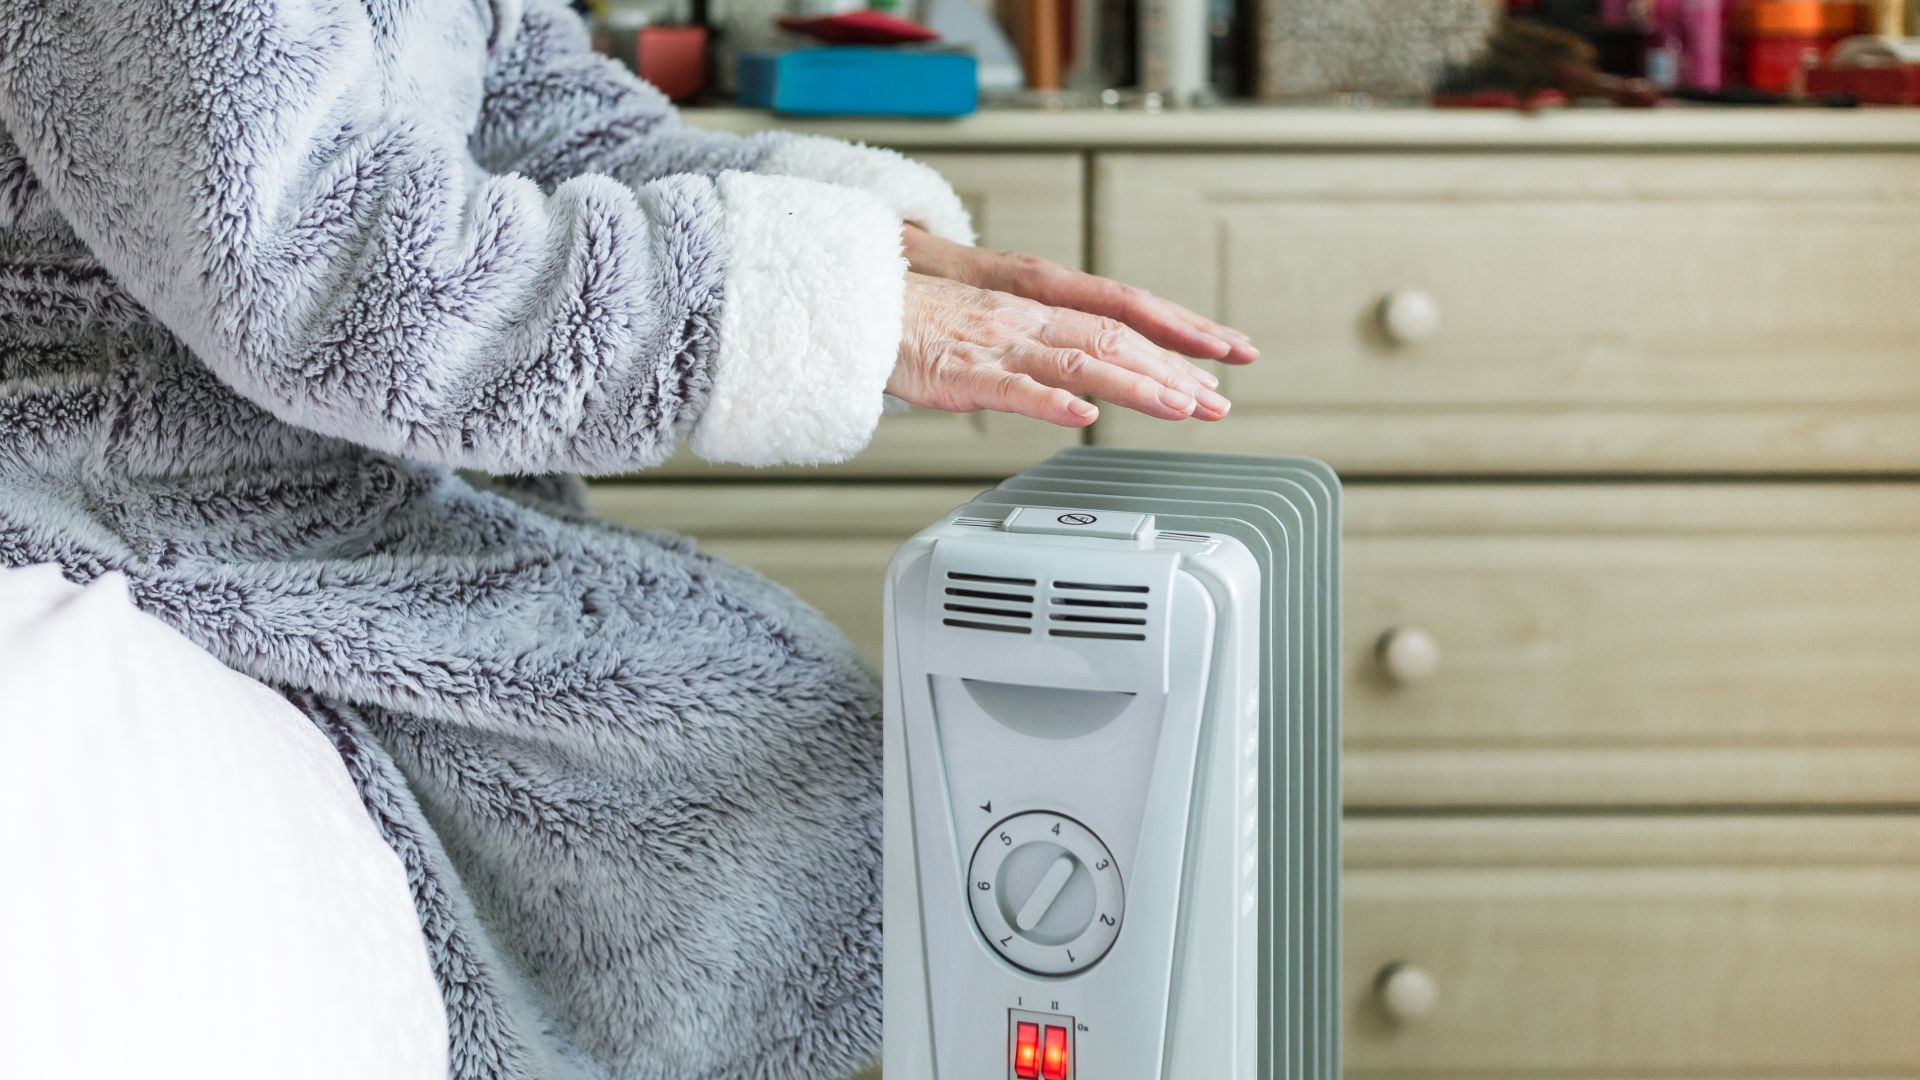 What Uses More Electricity: A Space Heater Or Central Heat?